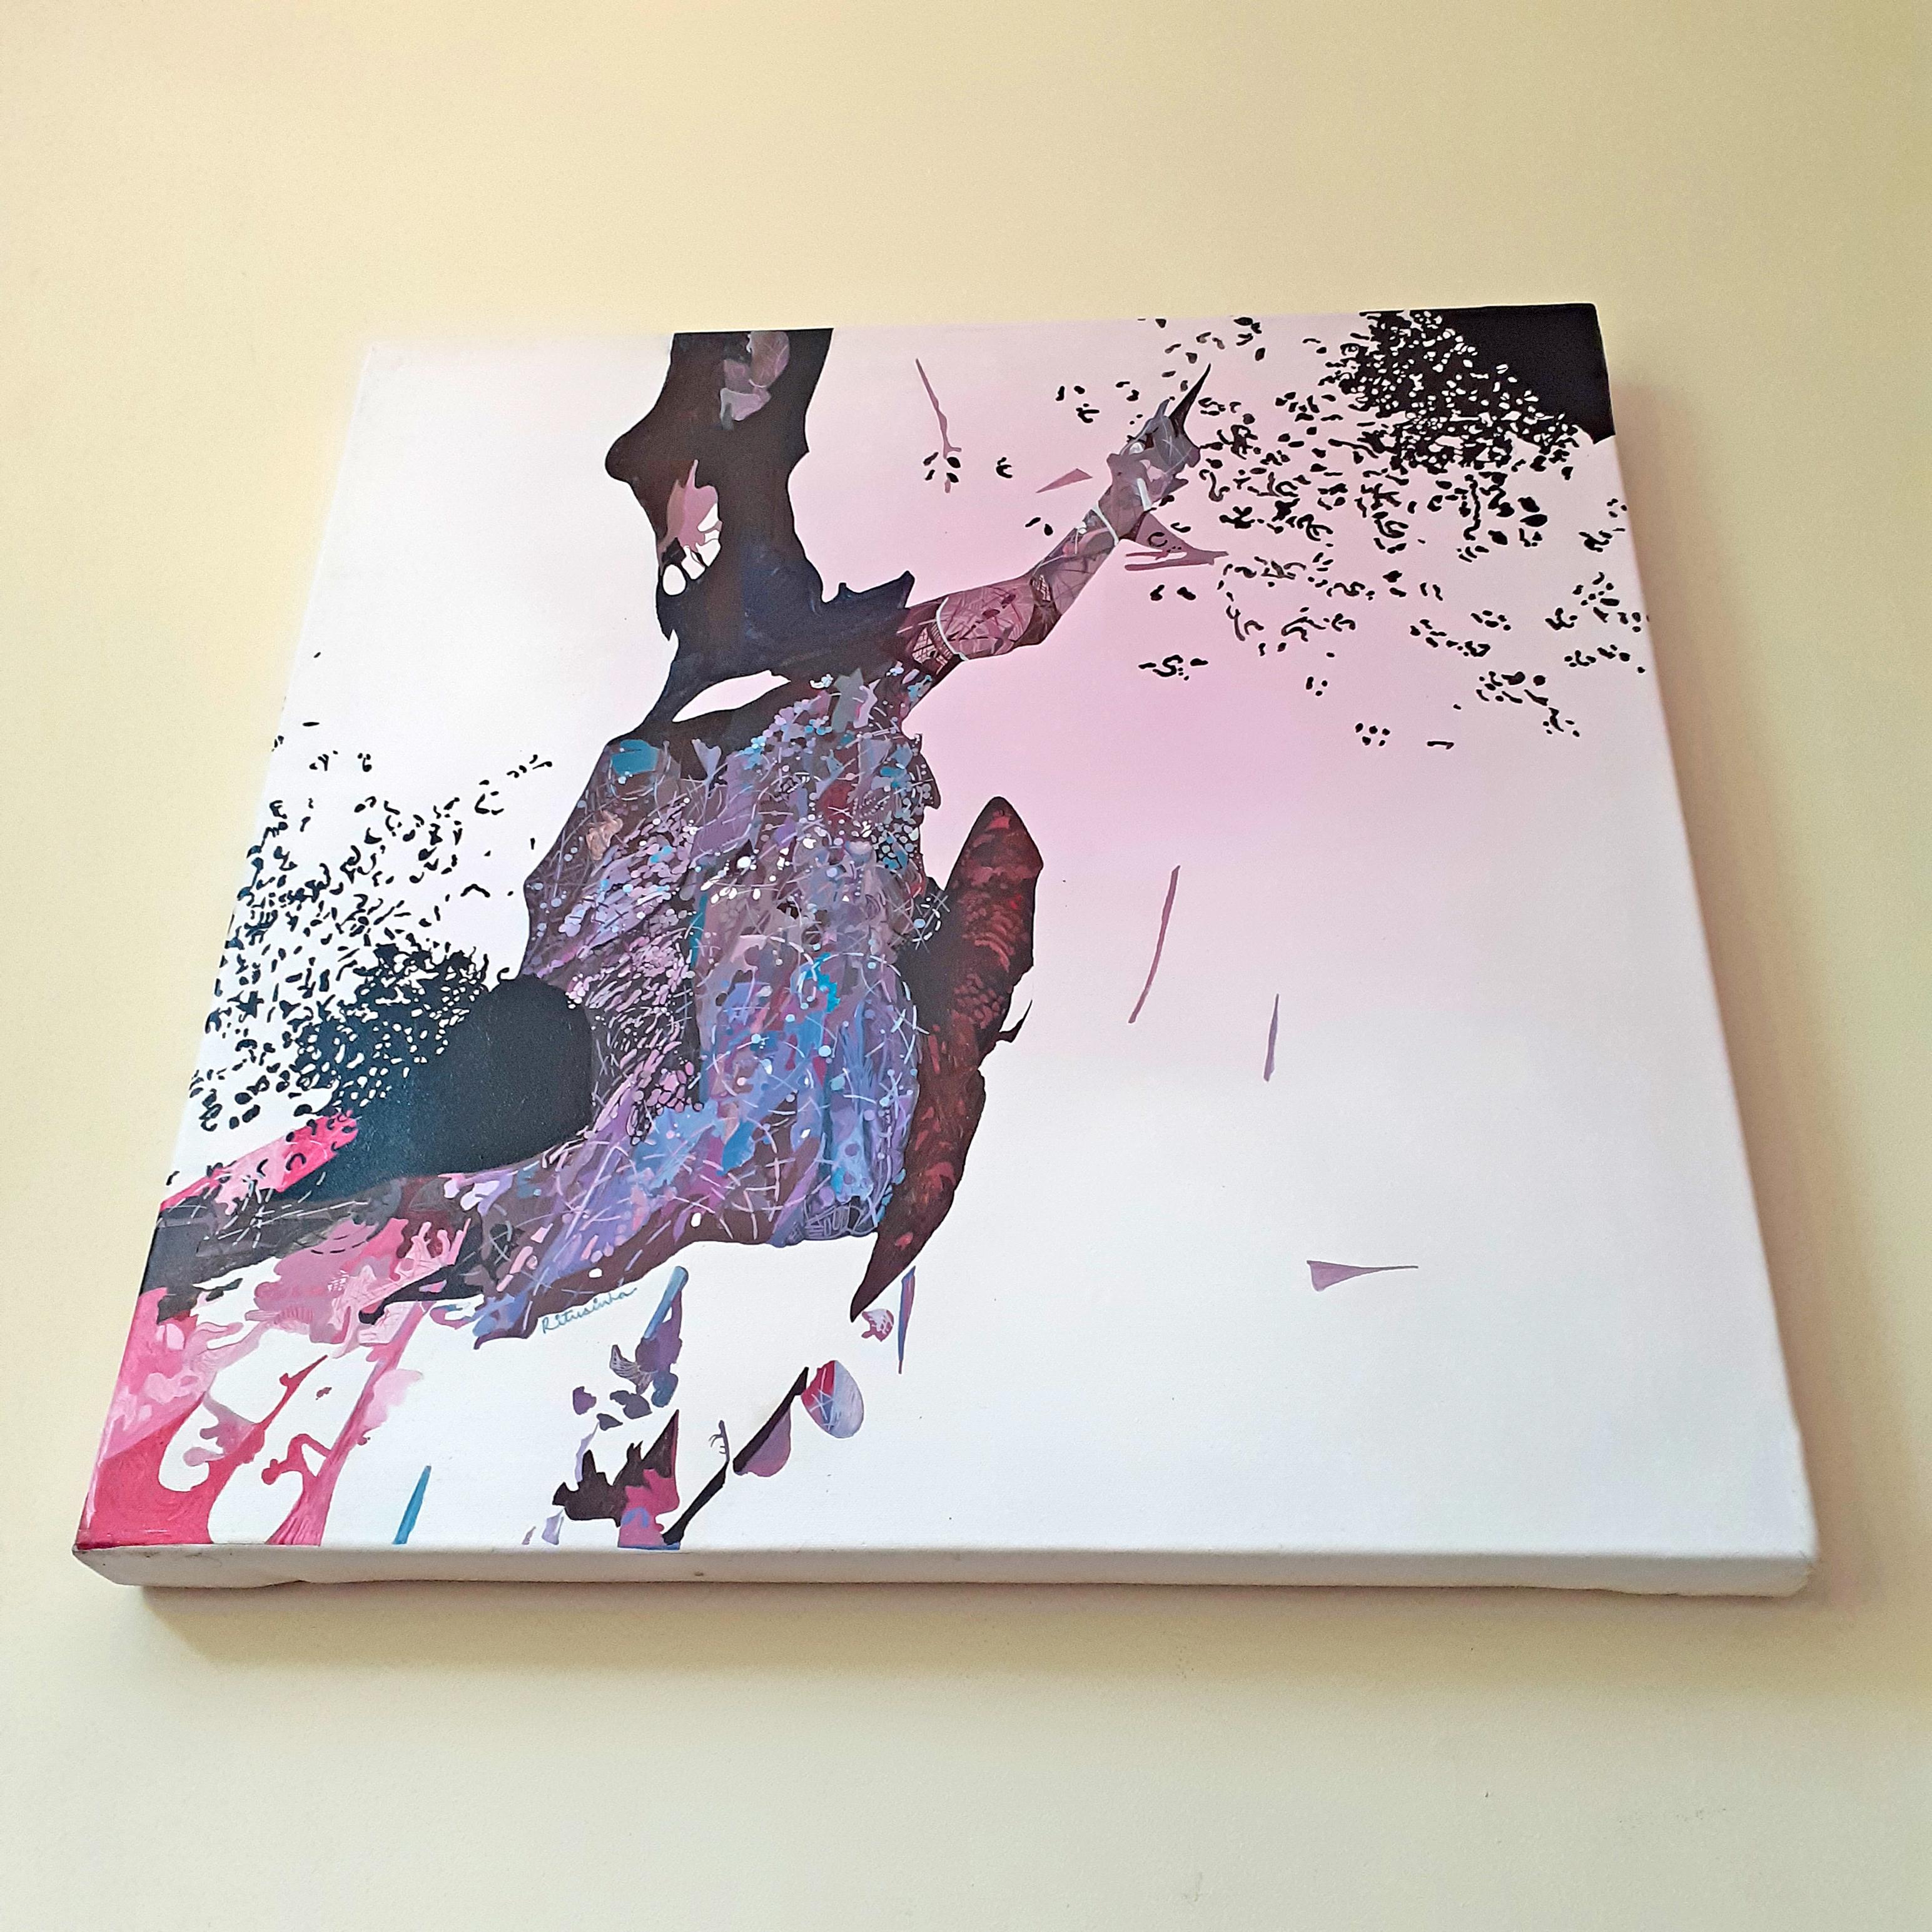 I Believe I Can Fly -Incredible 5 Panel Painting in Pink + Grey by Indian Artist For Sale 10